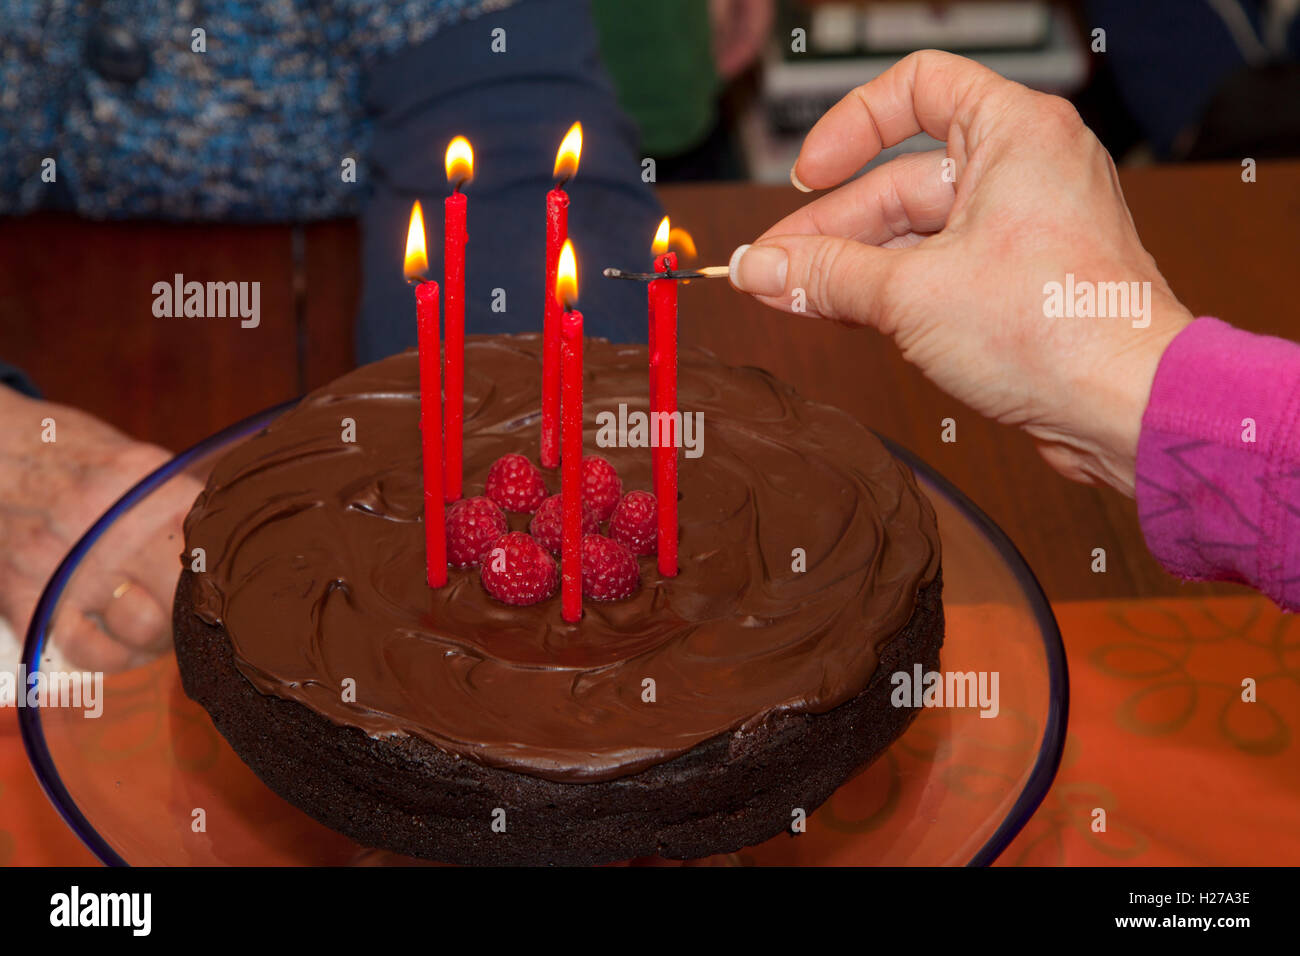 Five candles being lit on chocolate frosted birthday cake garnished with raspberries. St Paul Minnesota MN USA Stock Photo